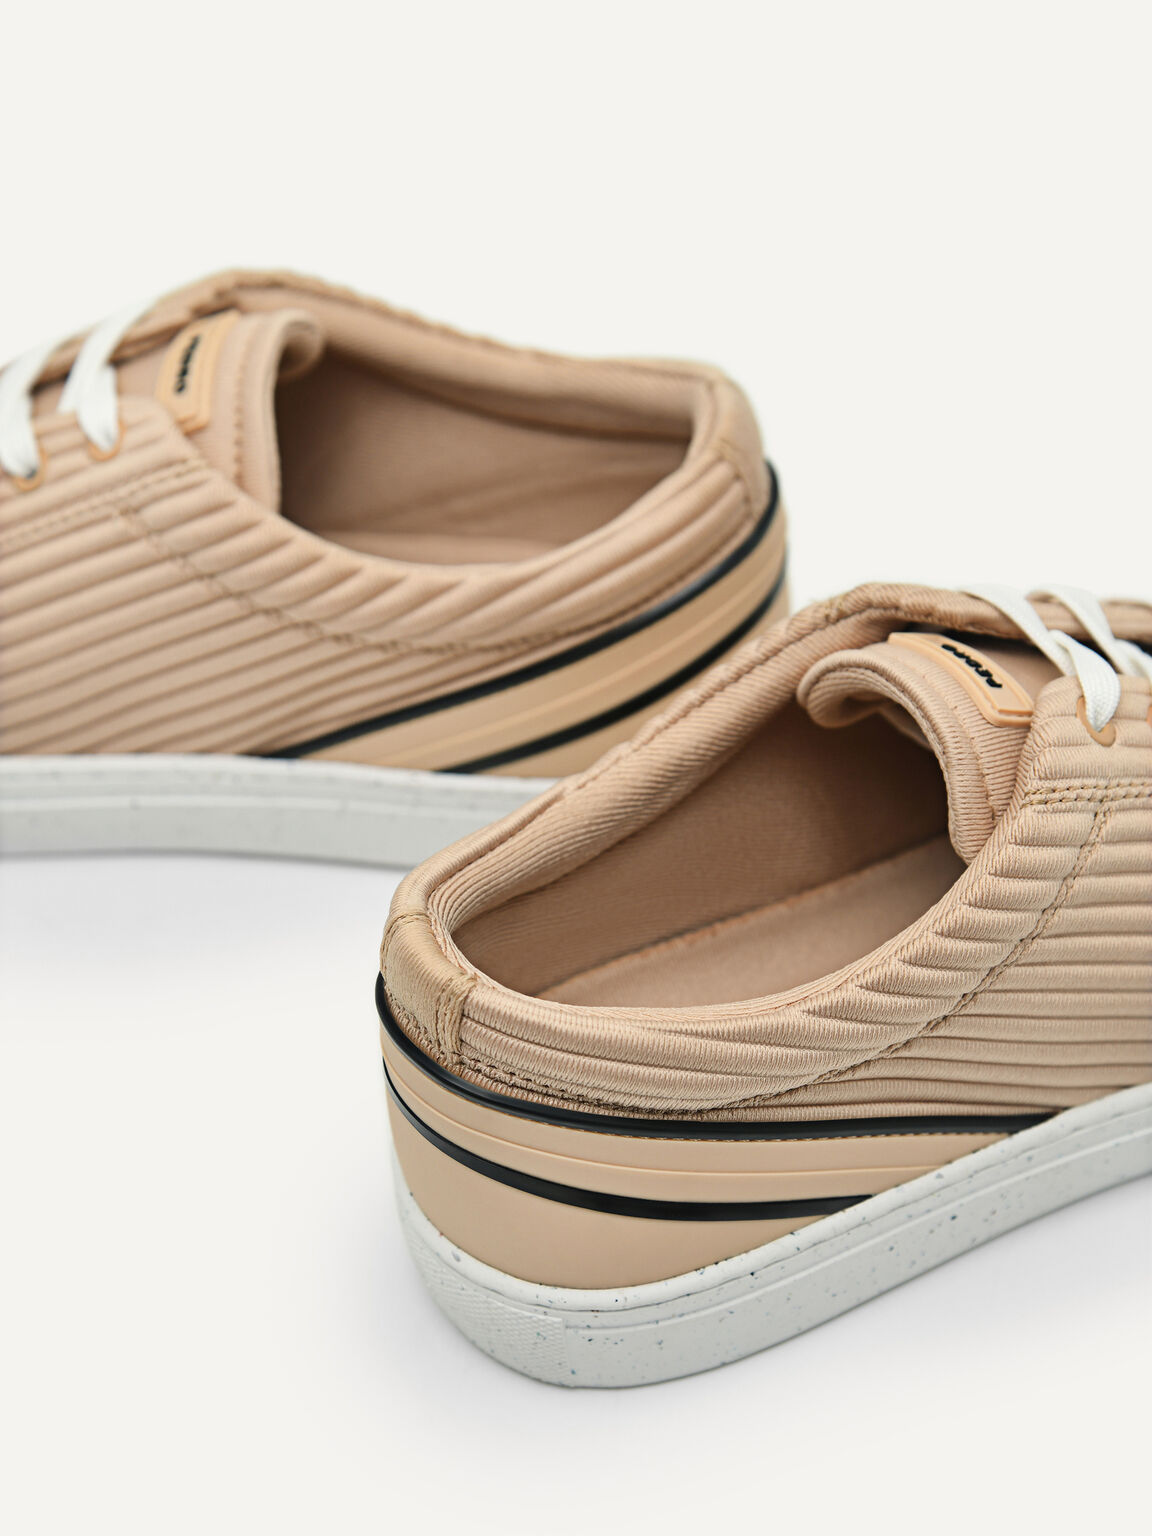 rePEDRO Pleated Sneakers, Nude